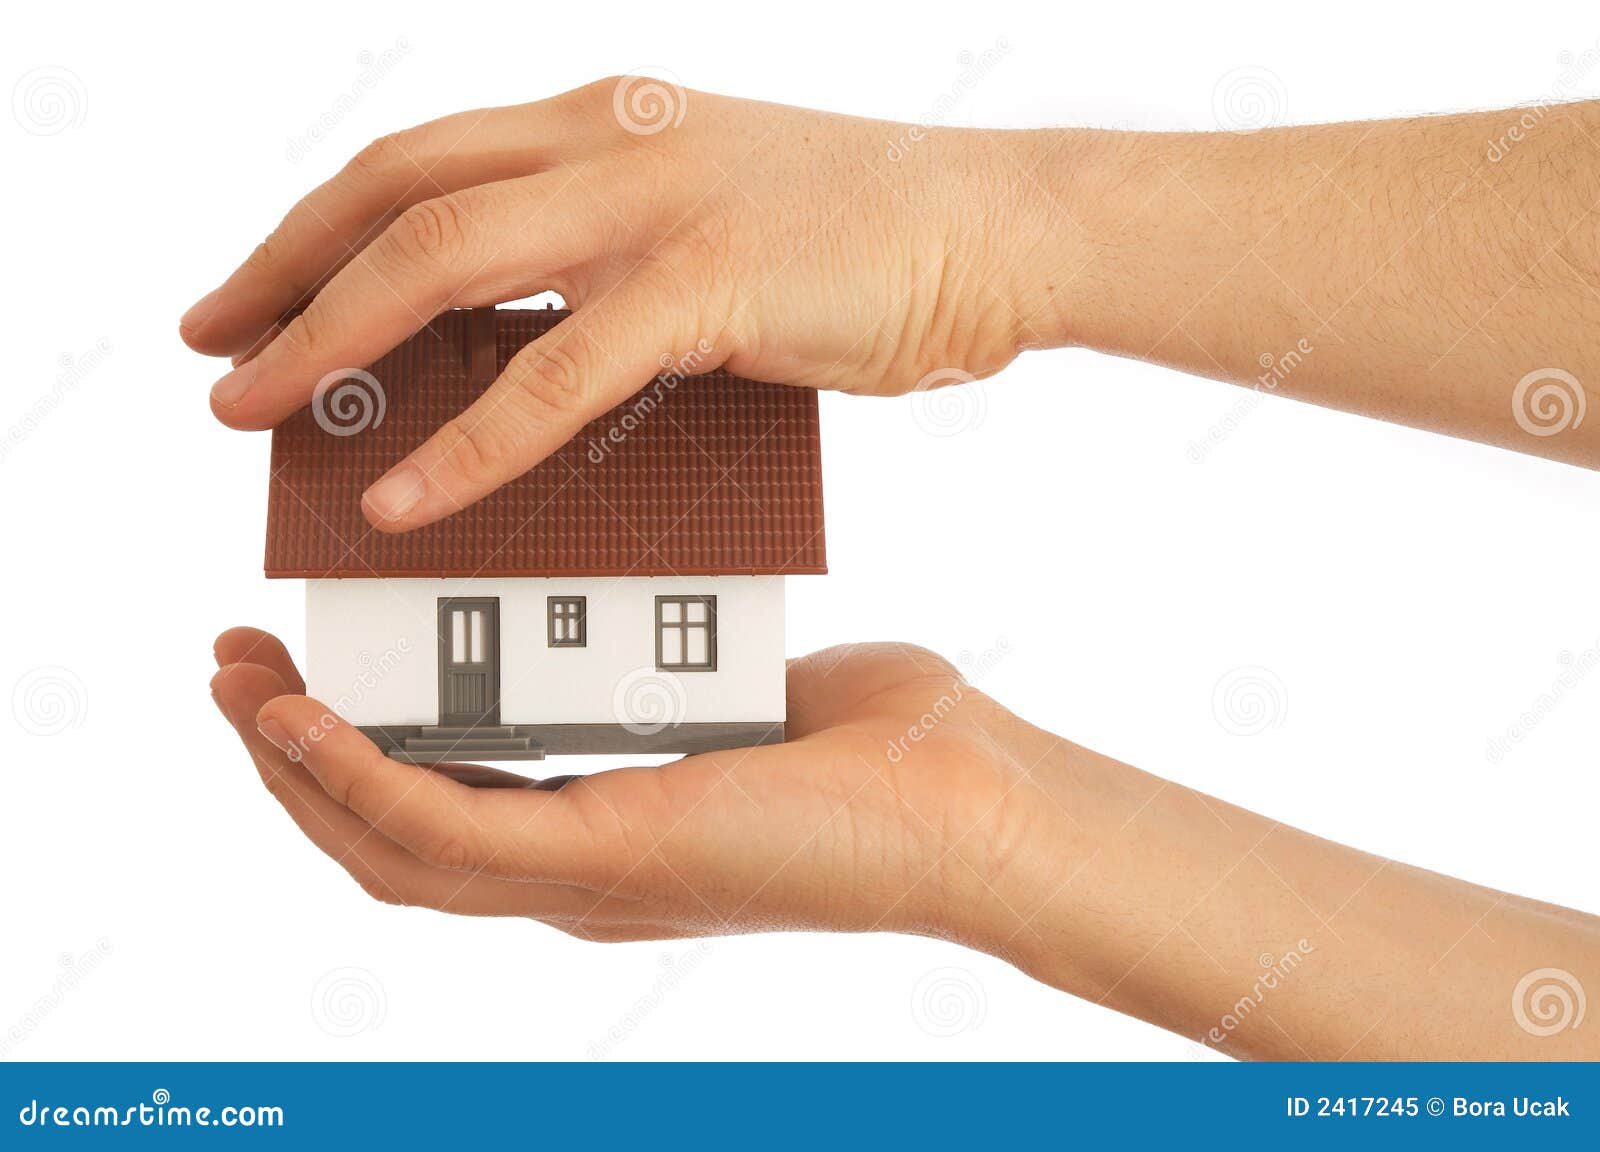 hands holding house clipart - photo #23